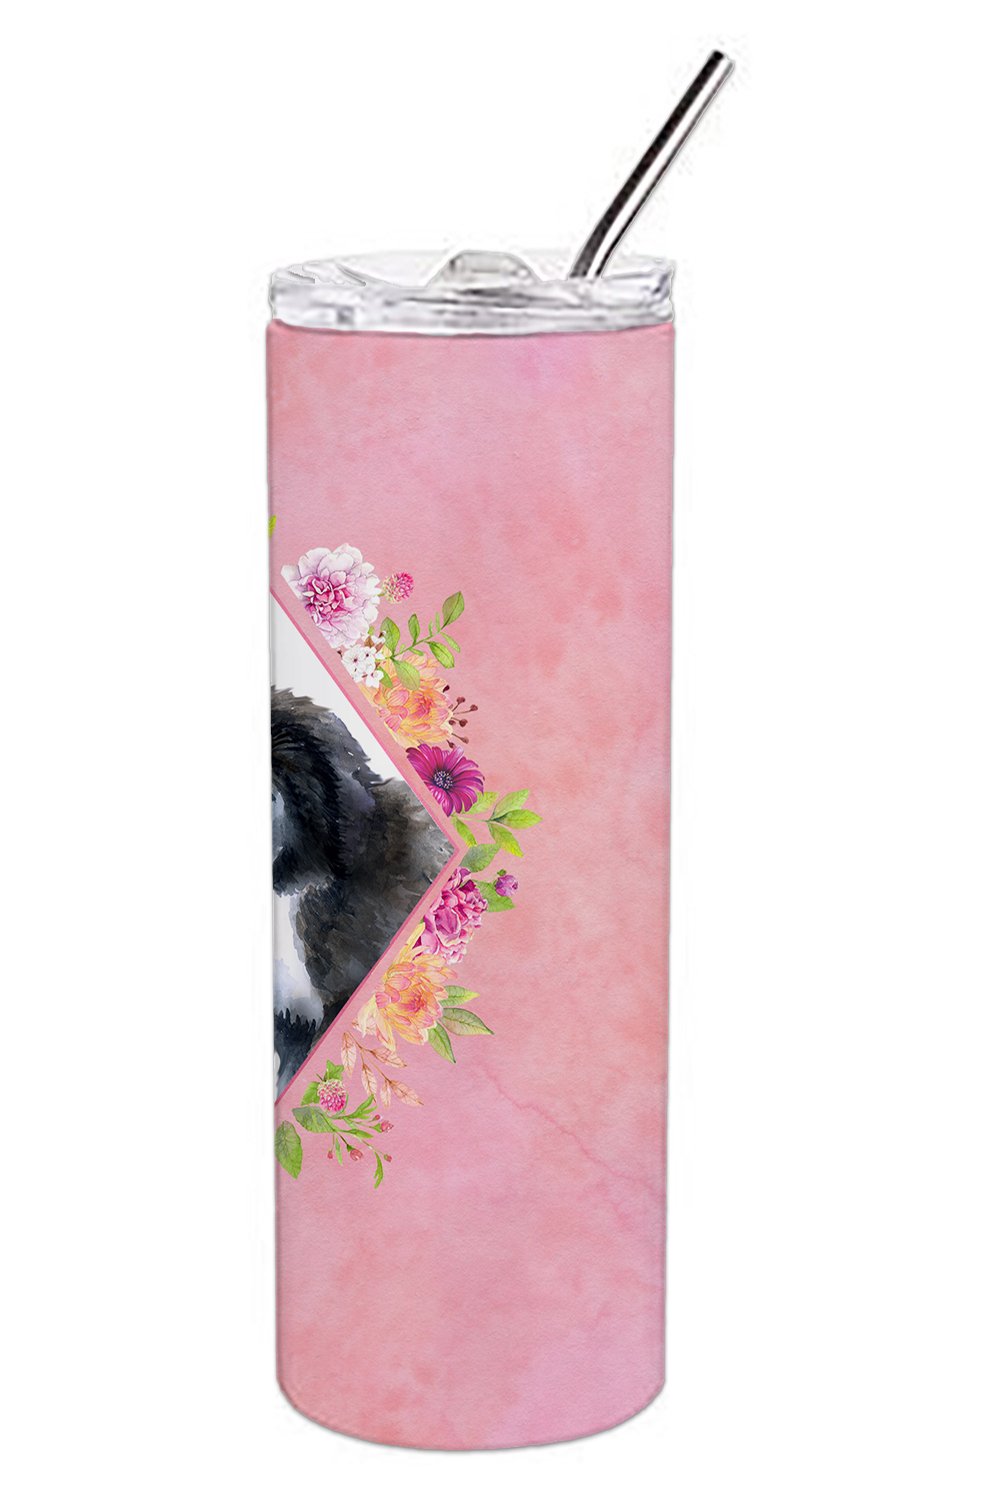 Newfoundland Puppy Pink Flowers Double Walled Stainless Steel 20 oz Skinny Tumbler CK4164TBL20 by Caroline's Treasures